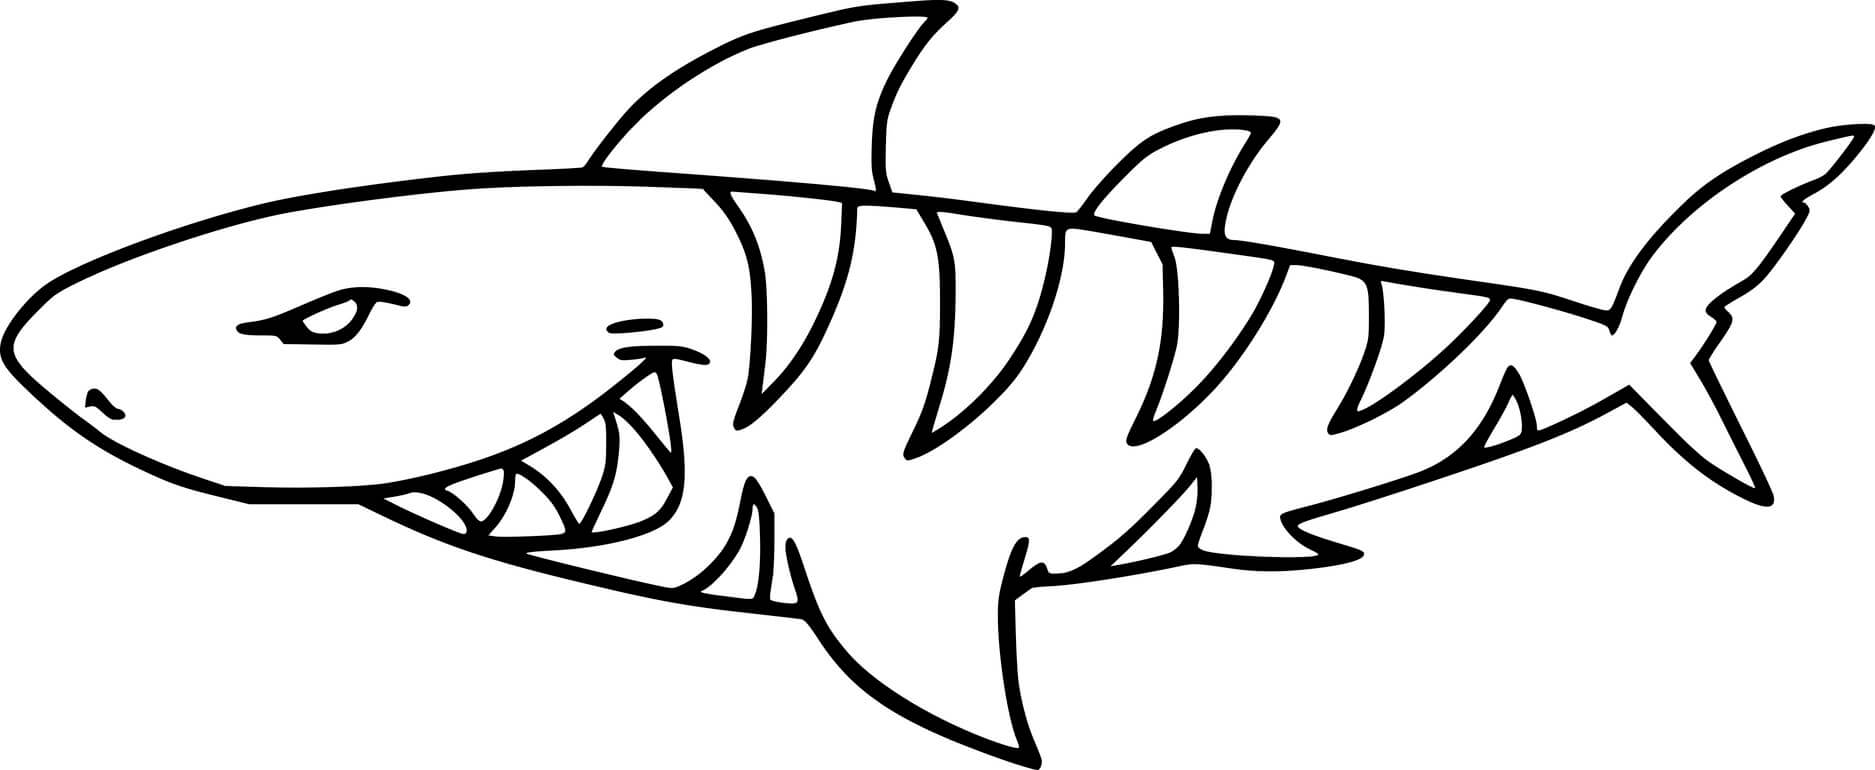 Simple Tiger Shark Coloring Page